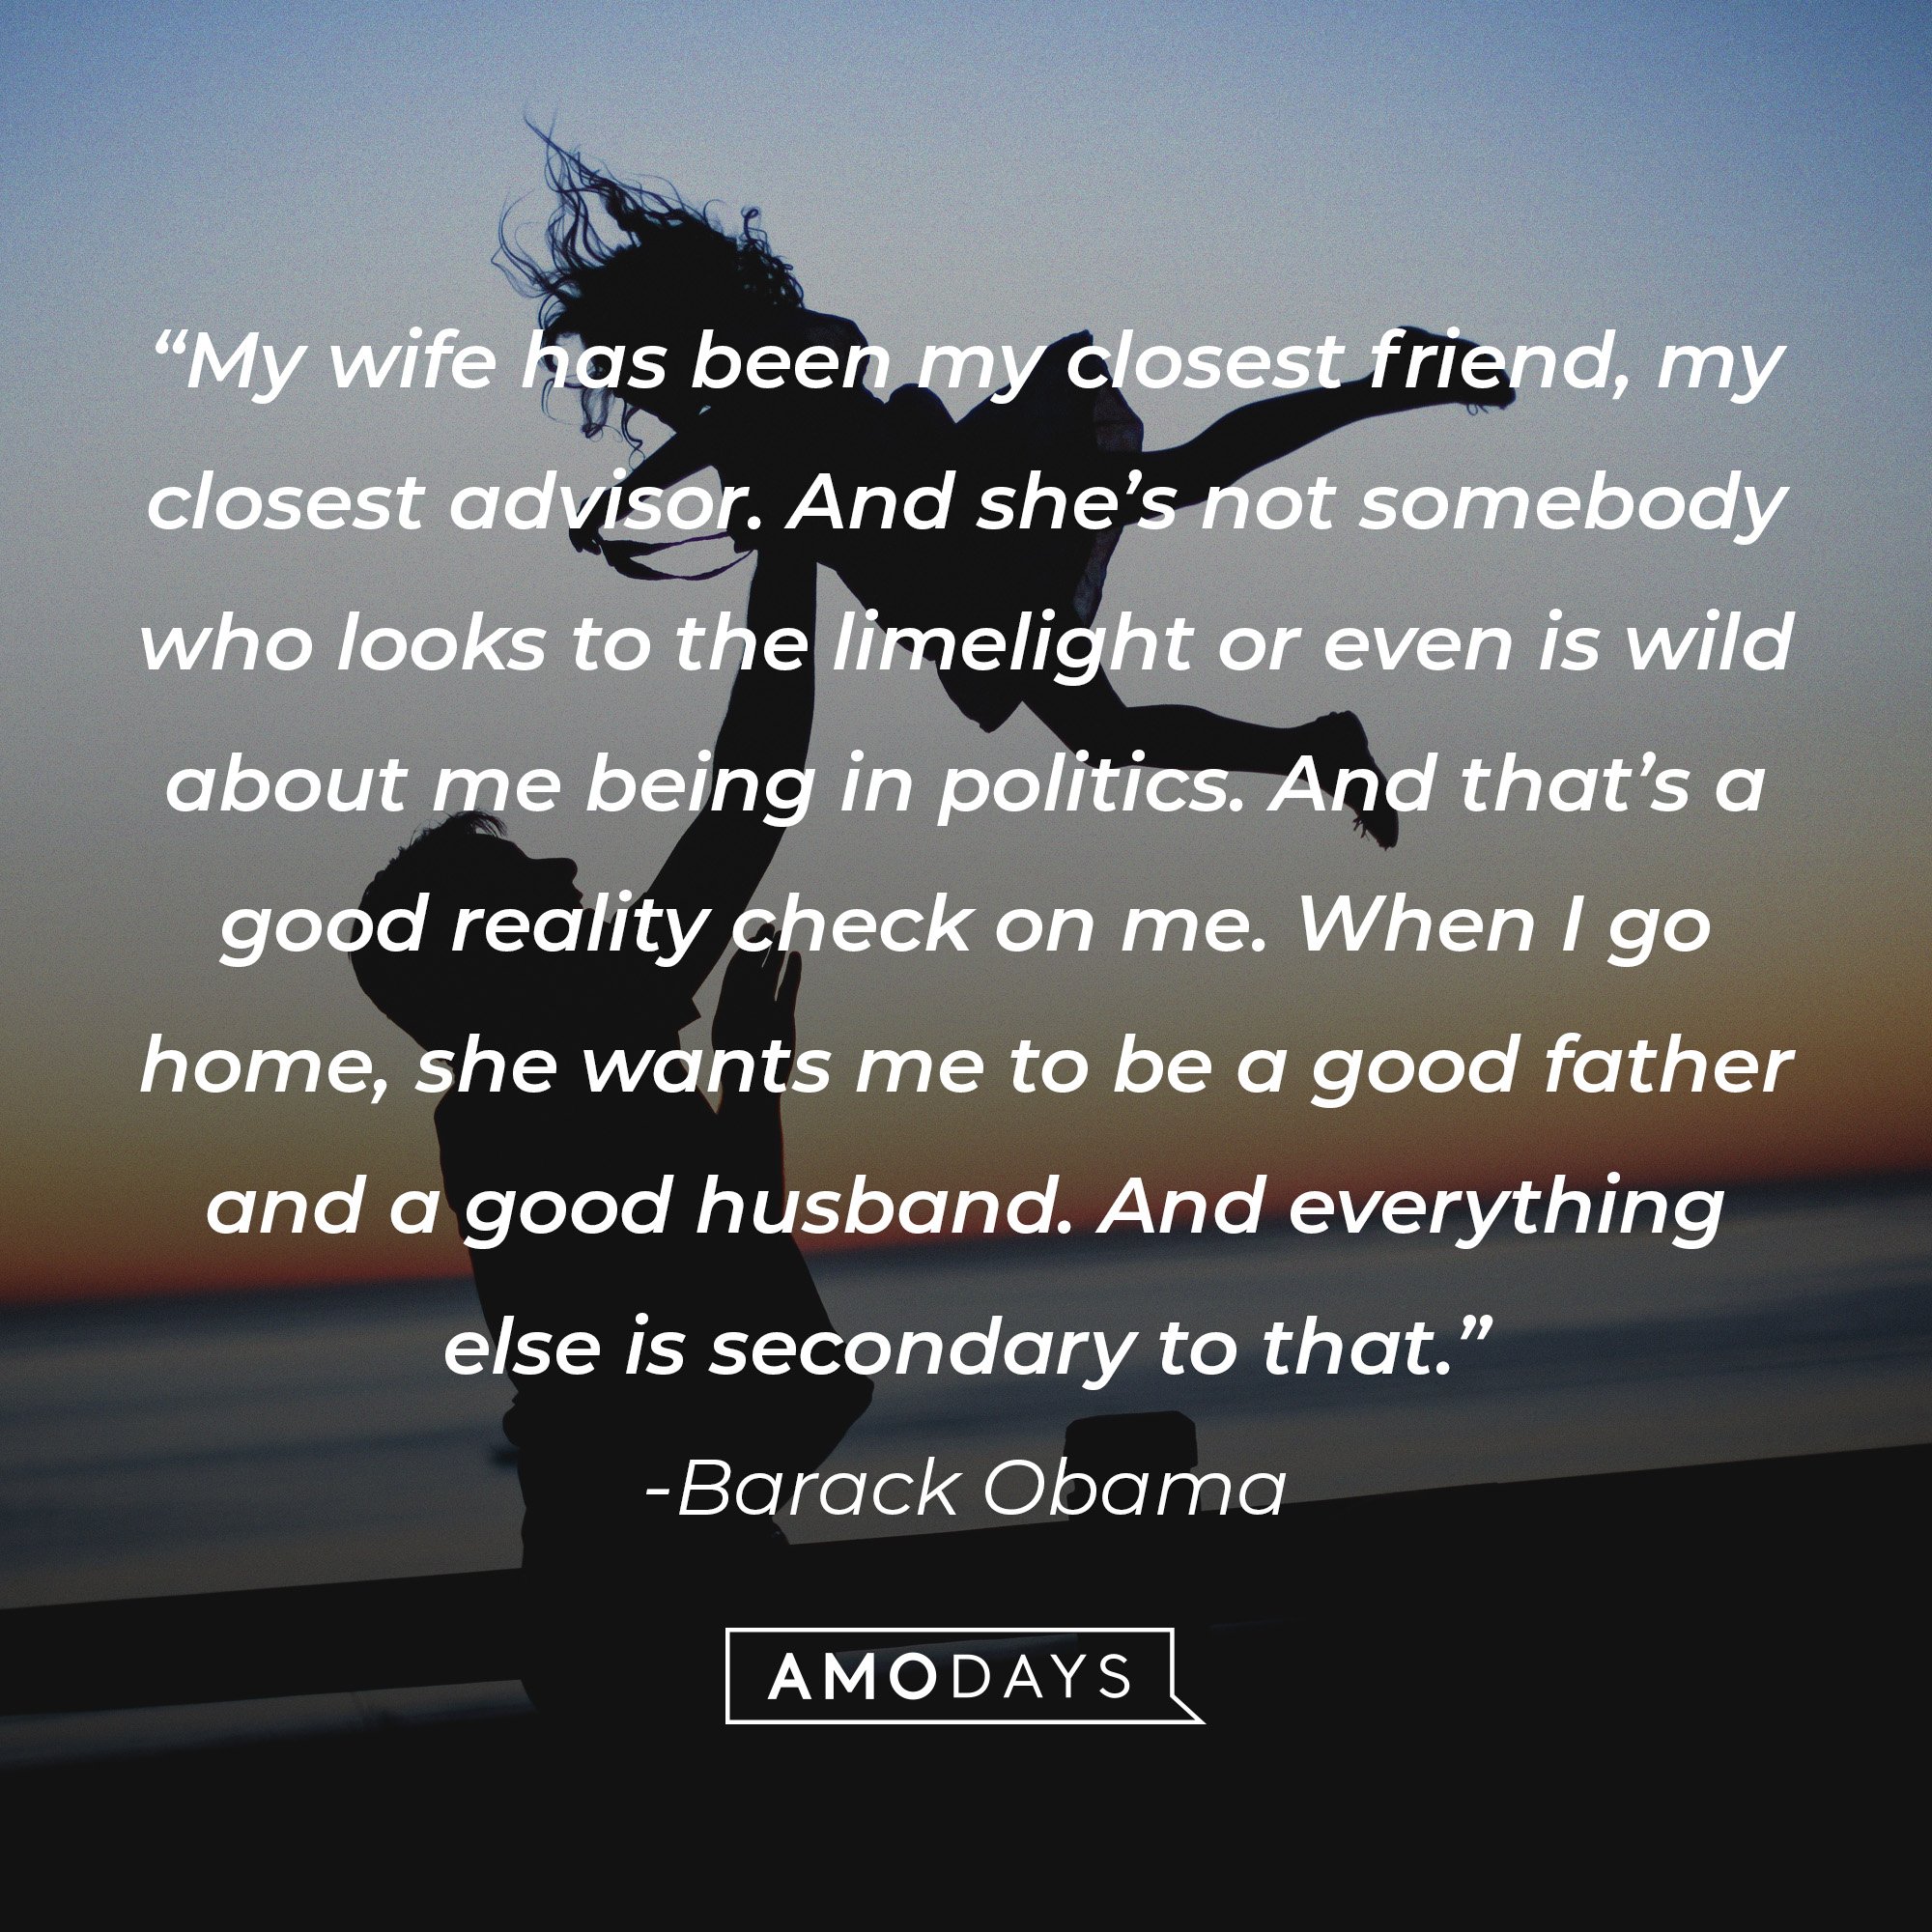 Barack Obama's quote: “My wife has been my closest friend, my closest advisor. And she’s not somebody who looks to the limelight or even is wild about me being in politics. And that’s a good reality check on me. When I go home, she wants me to be a good father and a good husband. And everything else is secondary to that.” I Image: AmoDays